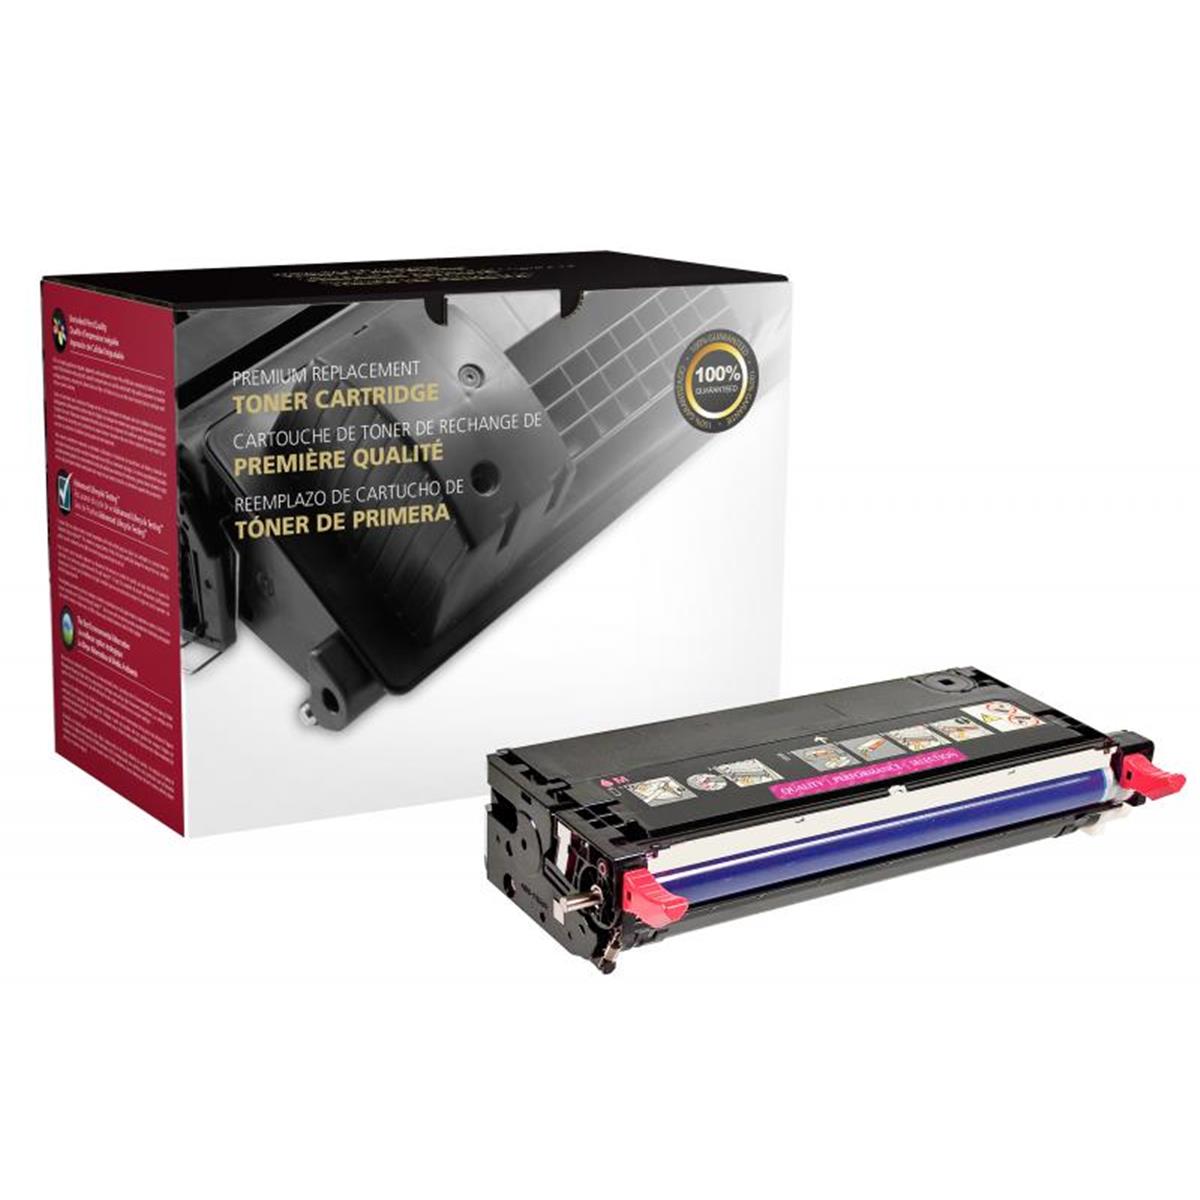 Picture of Dell 200505 High Yield Magenta Toner Cartridge for Dell 3130